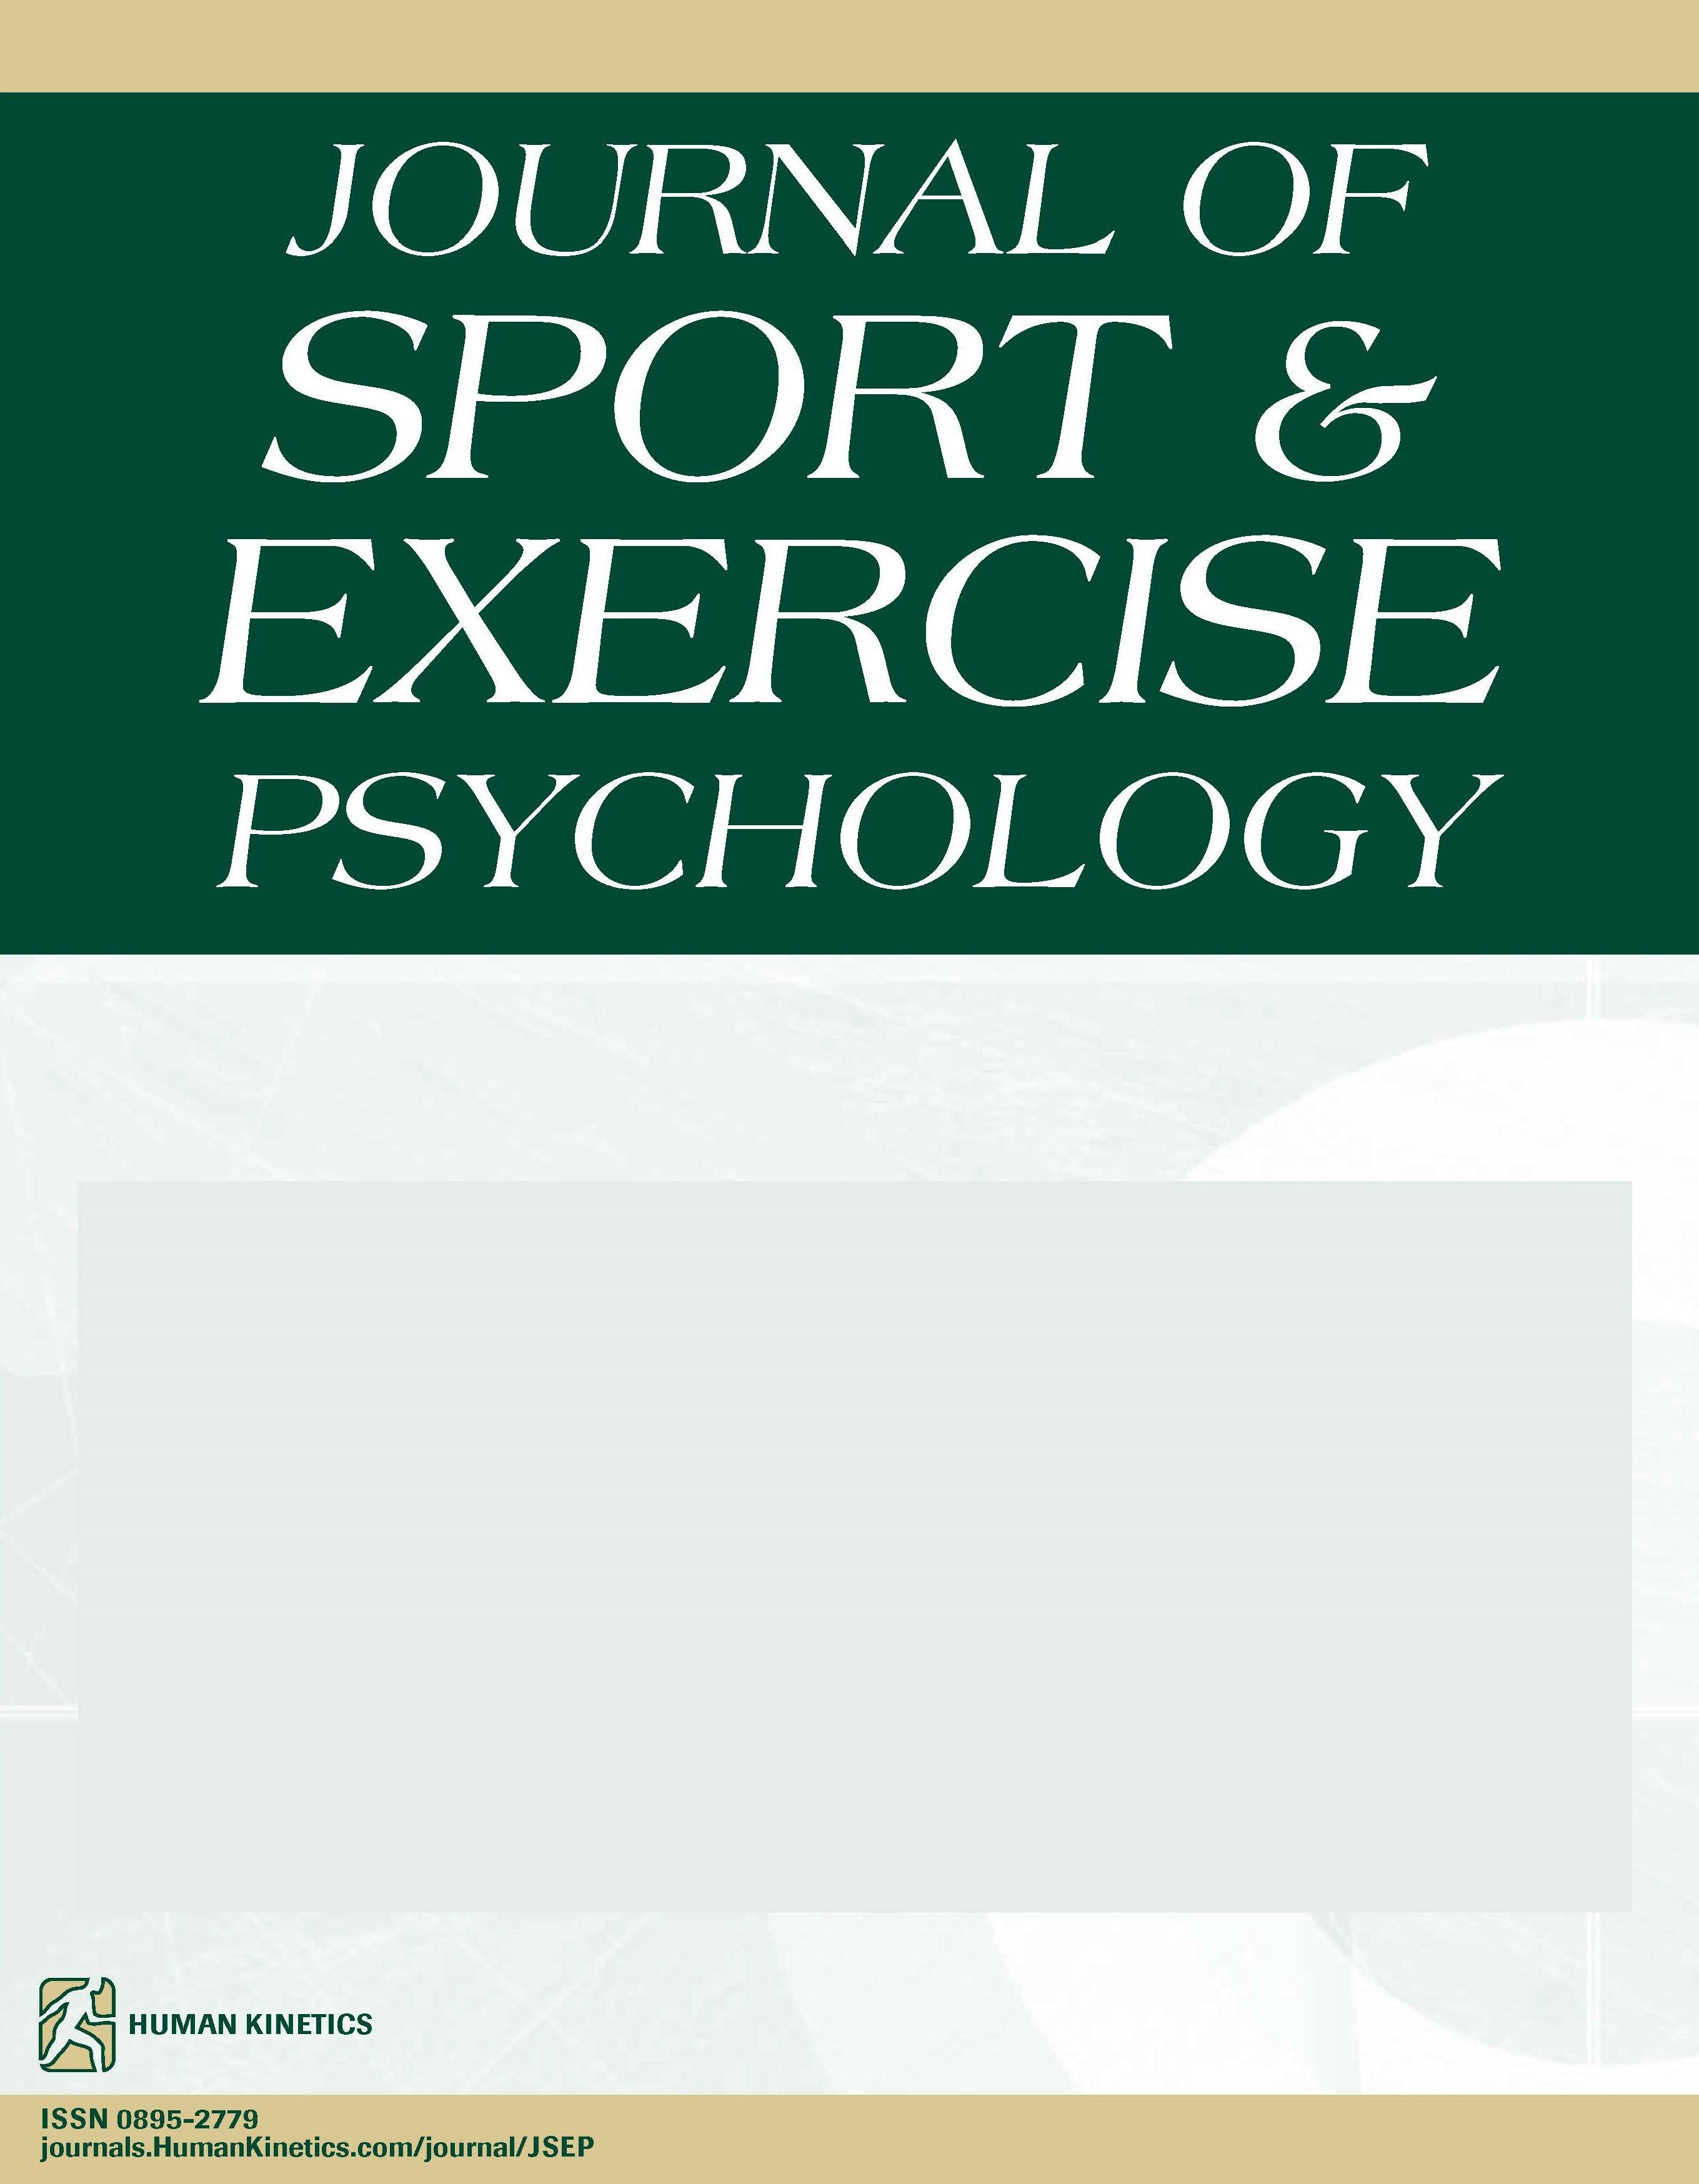 Teachers’ Verbal and Nonverbal Communication, Students’ Psychological Needs, and Positive and Negative Outcomes in Physical Education